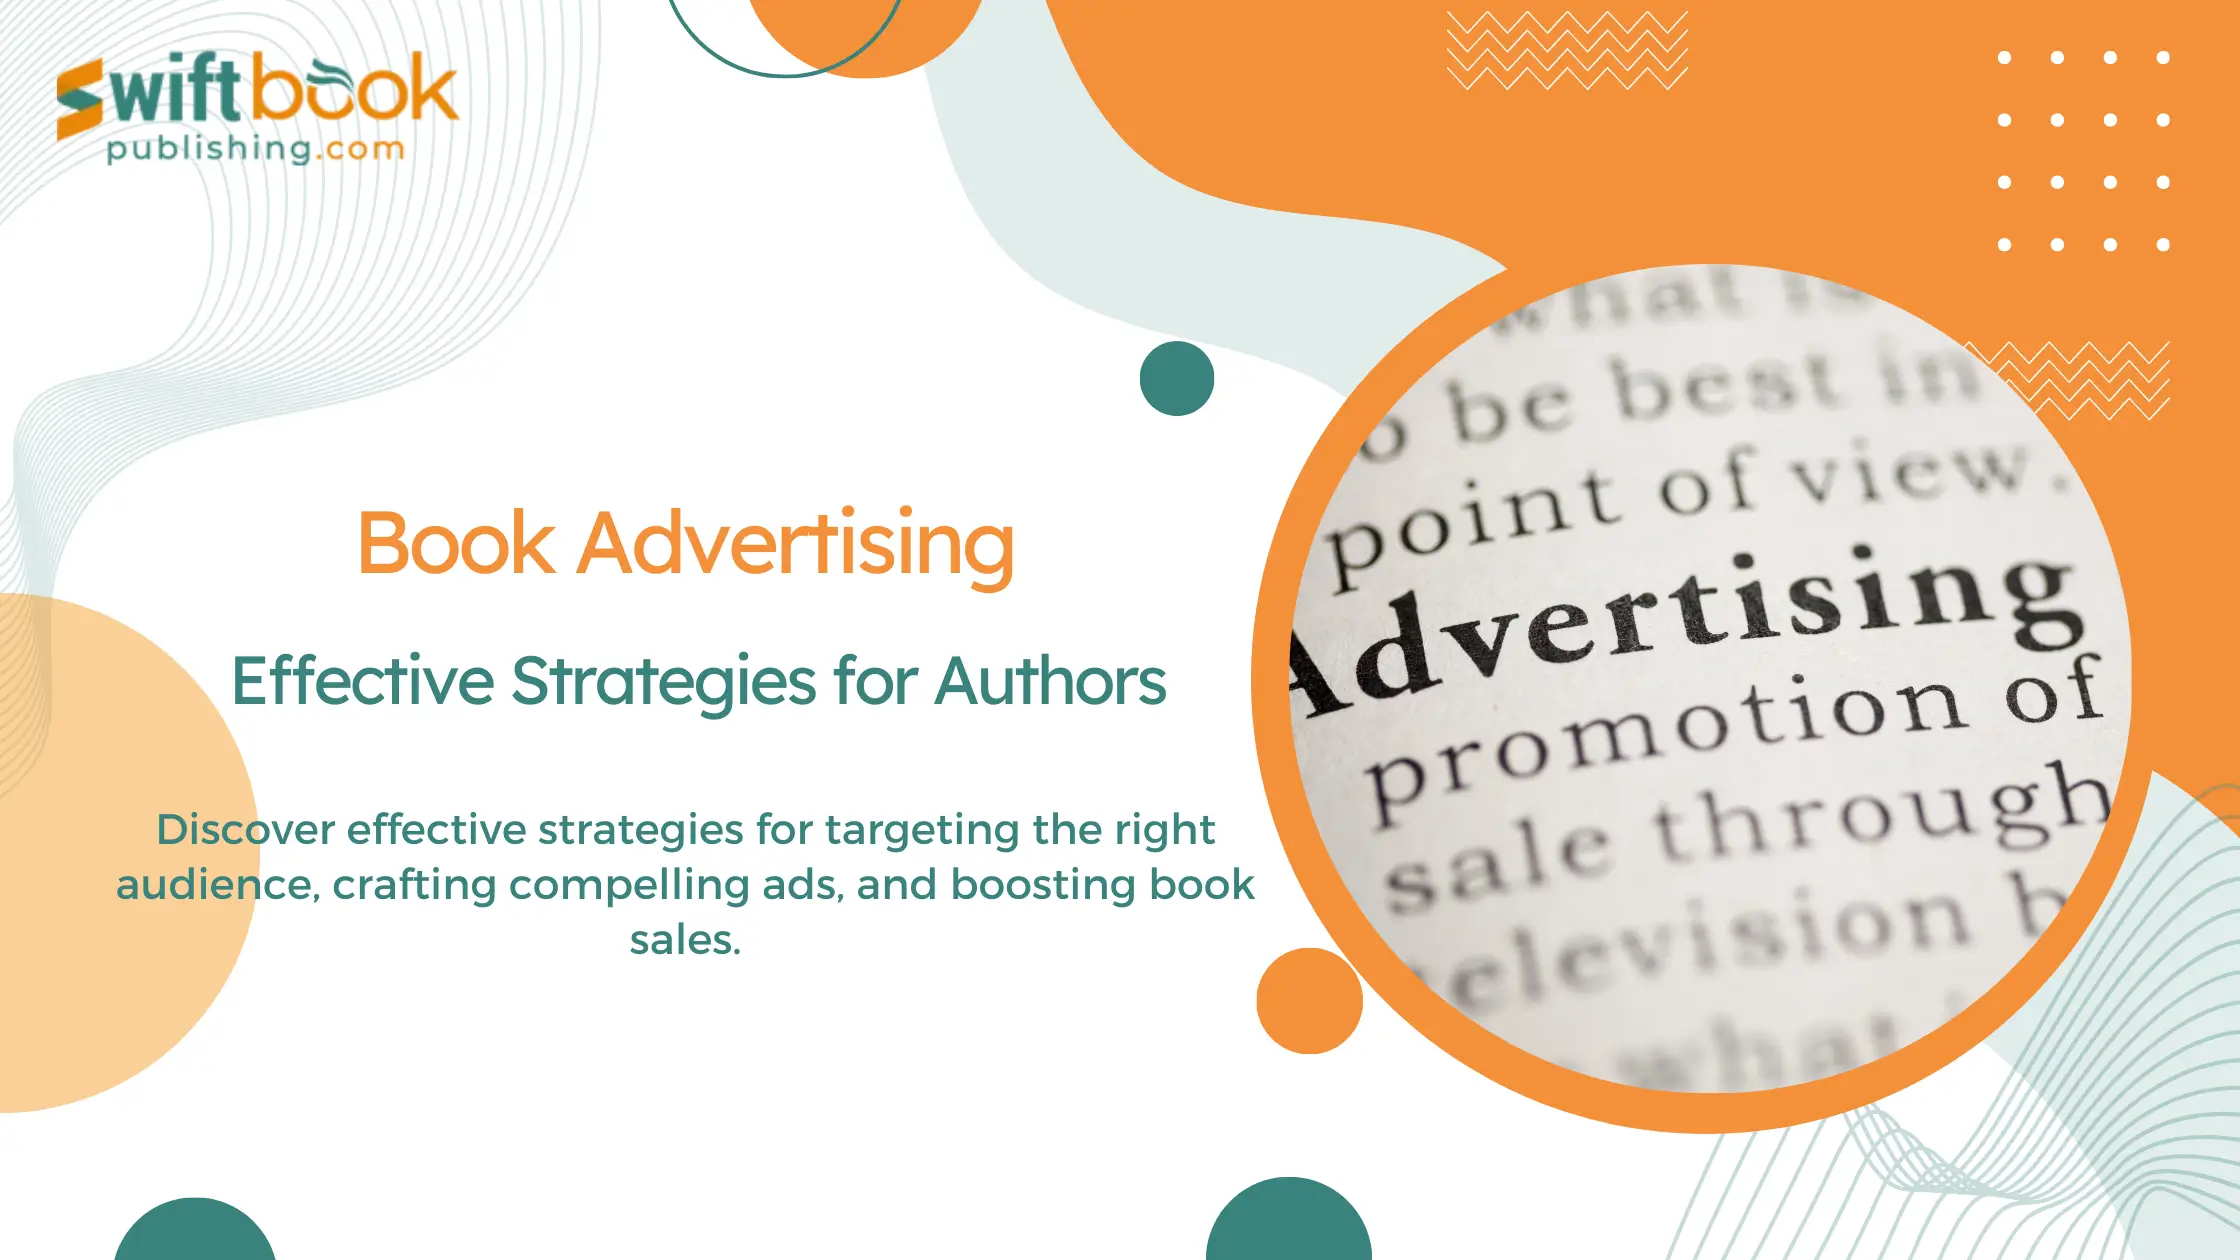 How to Advertise a Book Effective Strategies for Authors